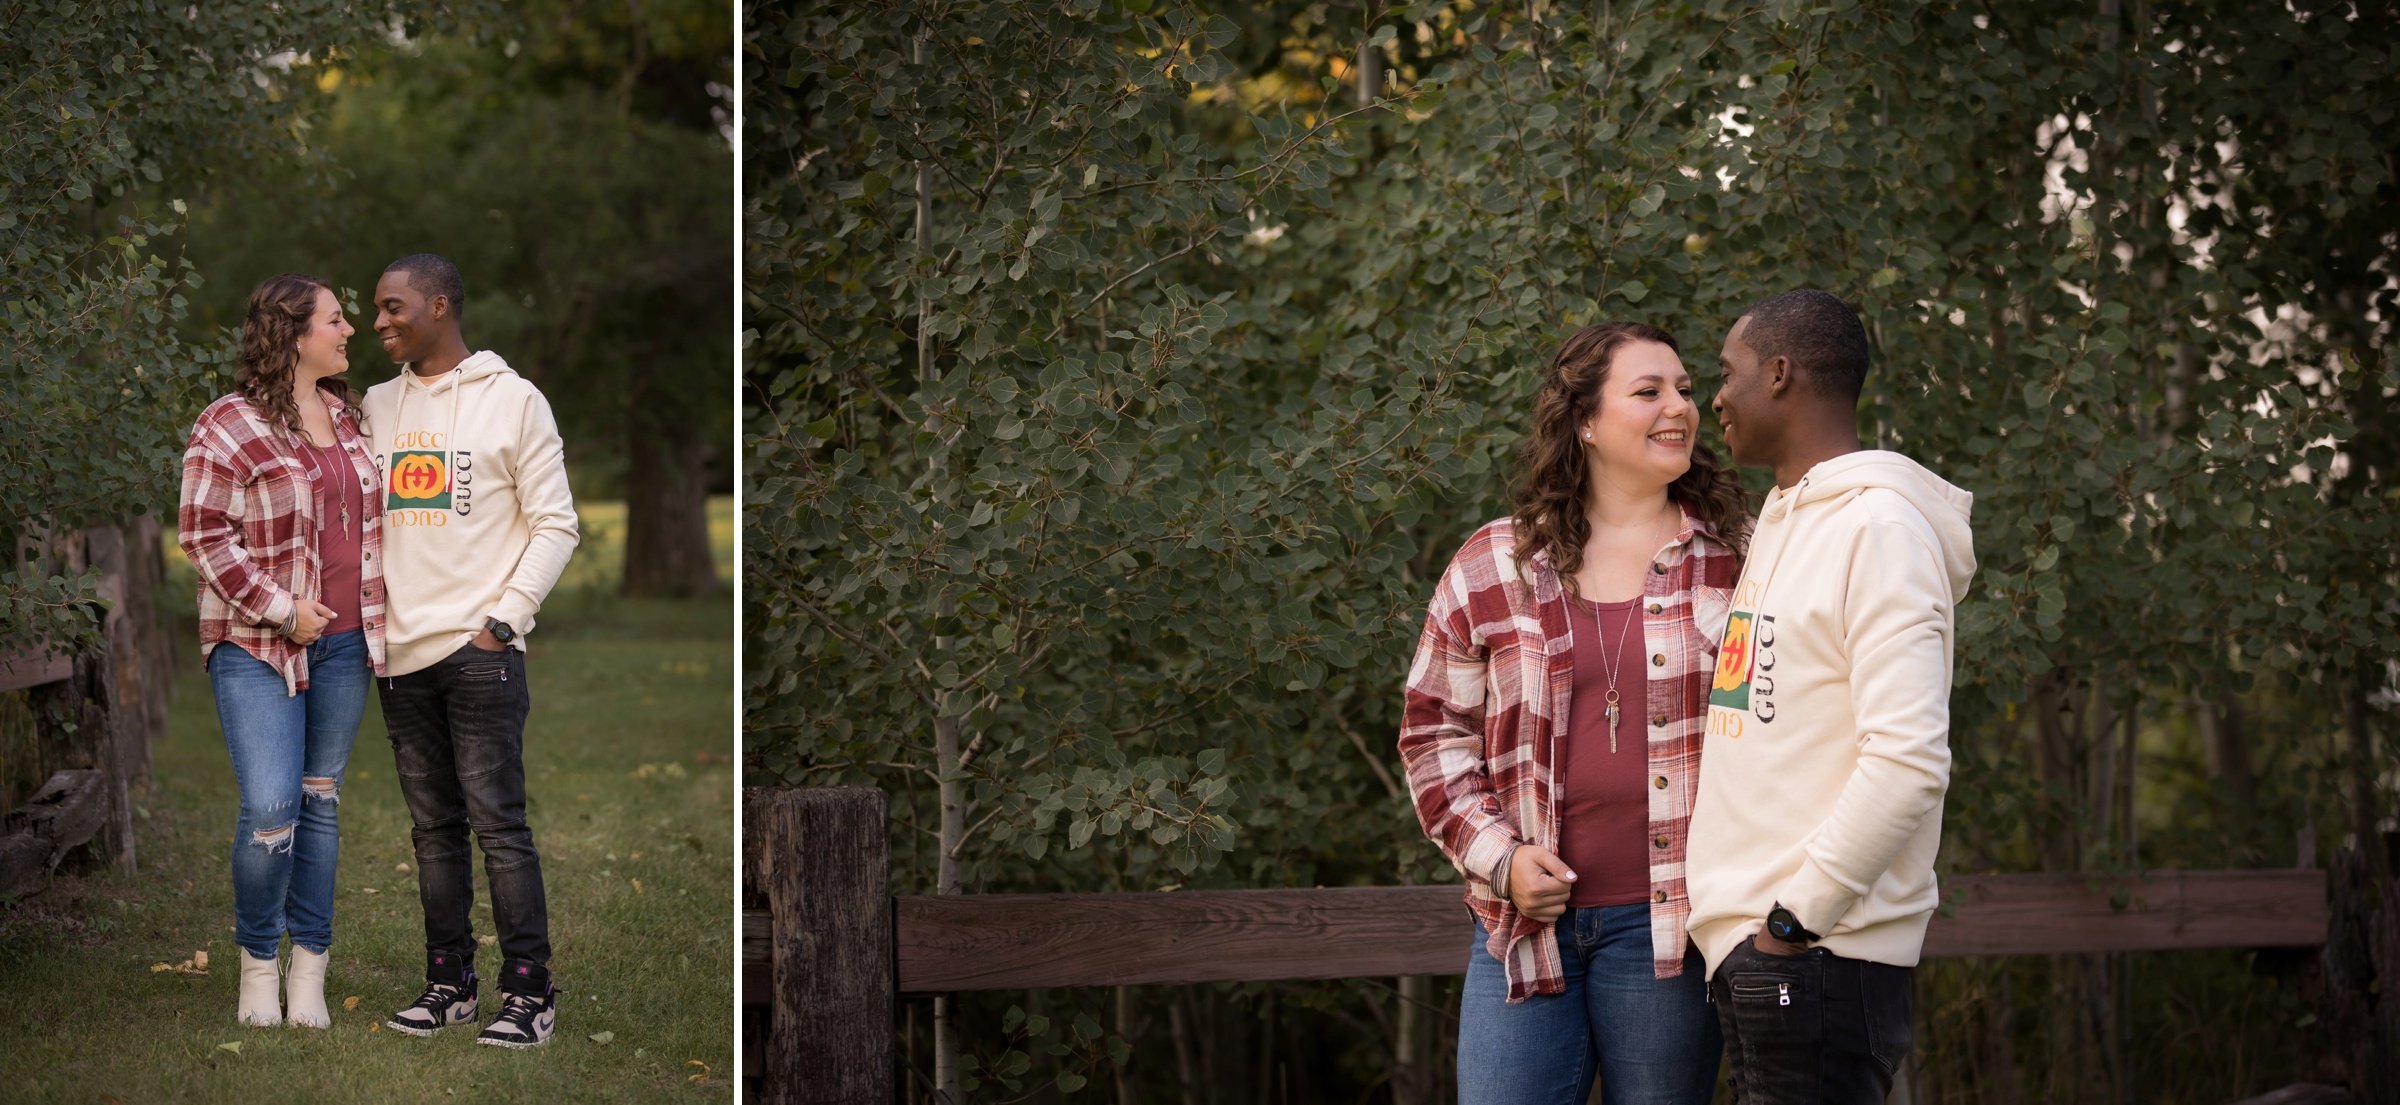 Jessica and Paul - A Sunset Bay Shore Park Engagement Session19.jpg